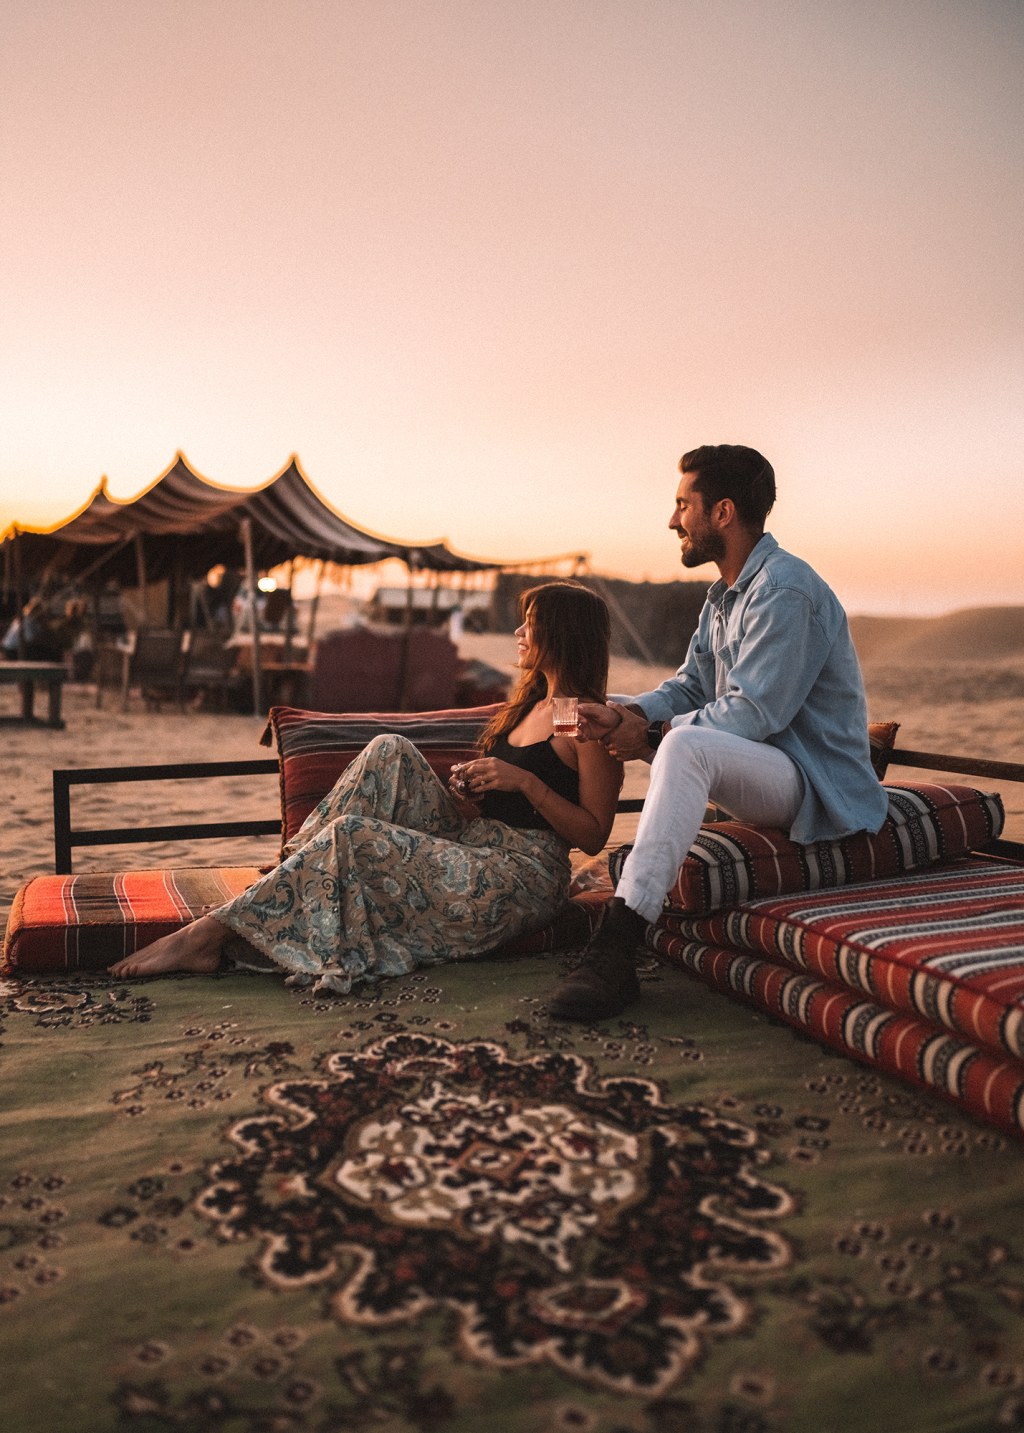 the dubai uae photo guide the top most instagrammable places